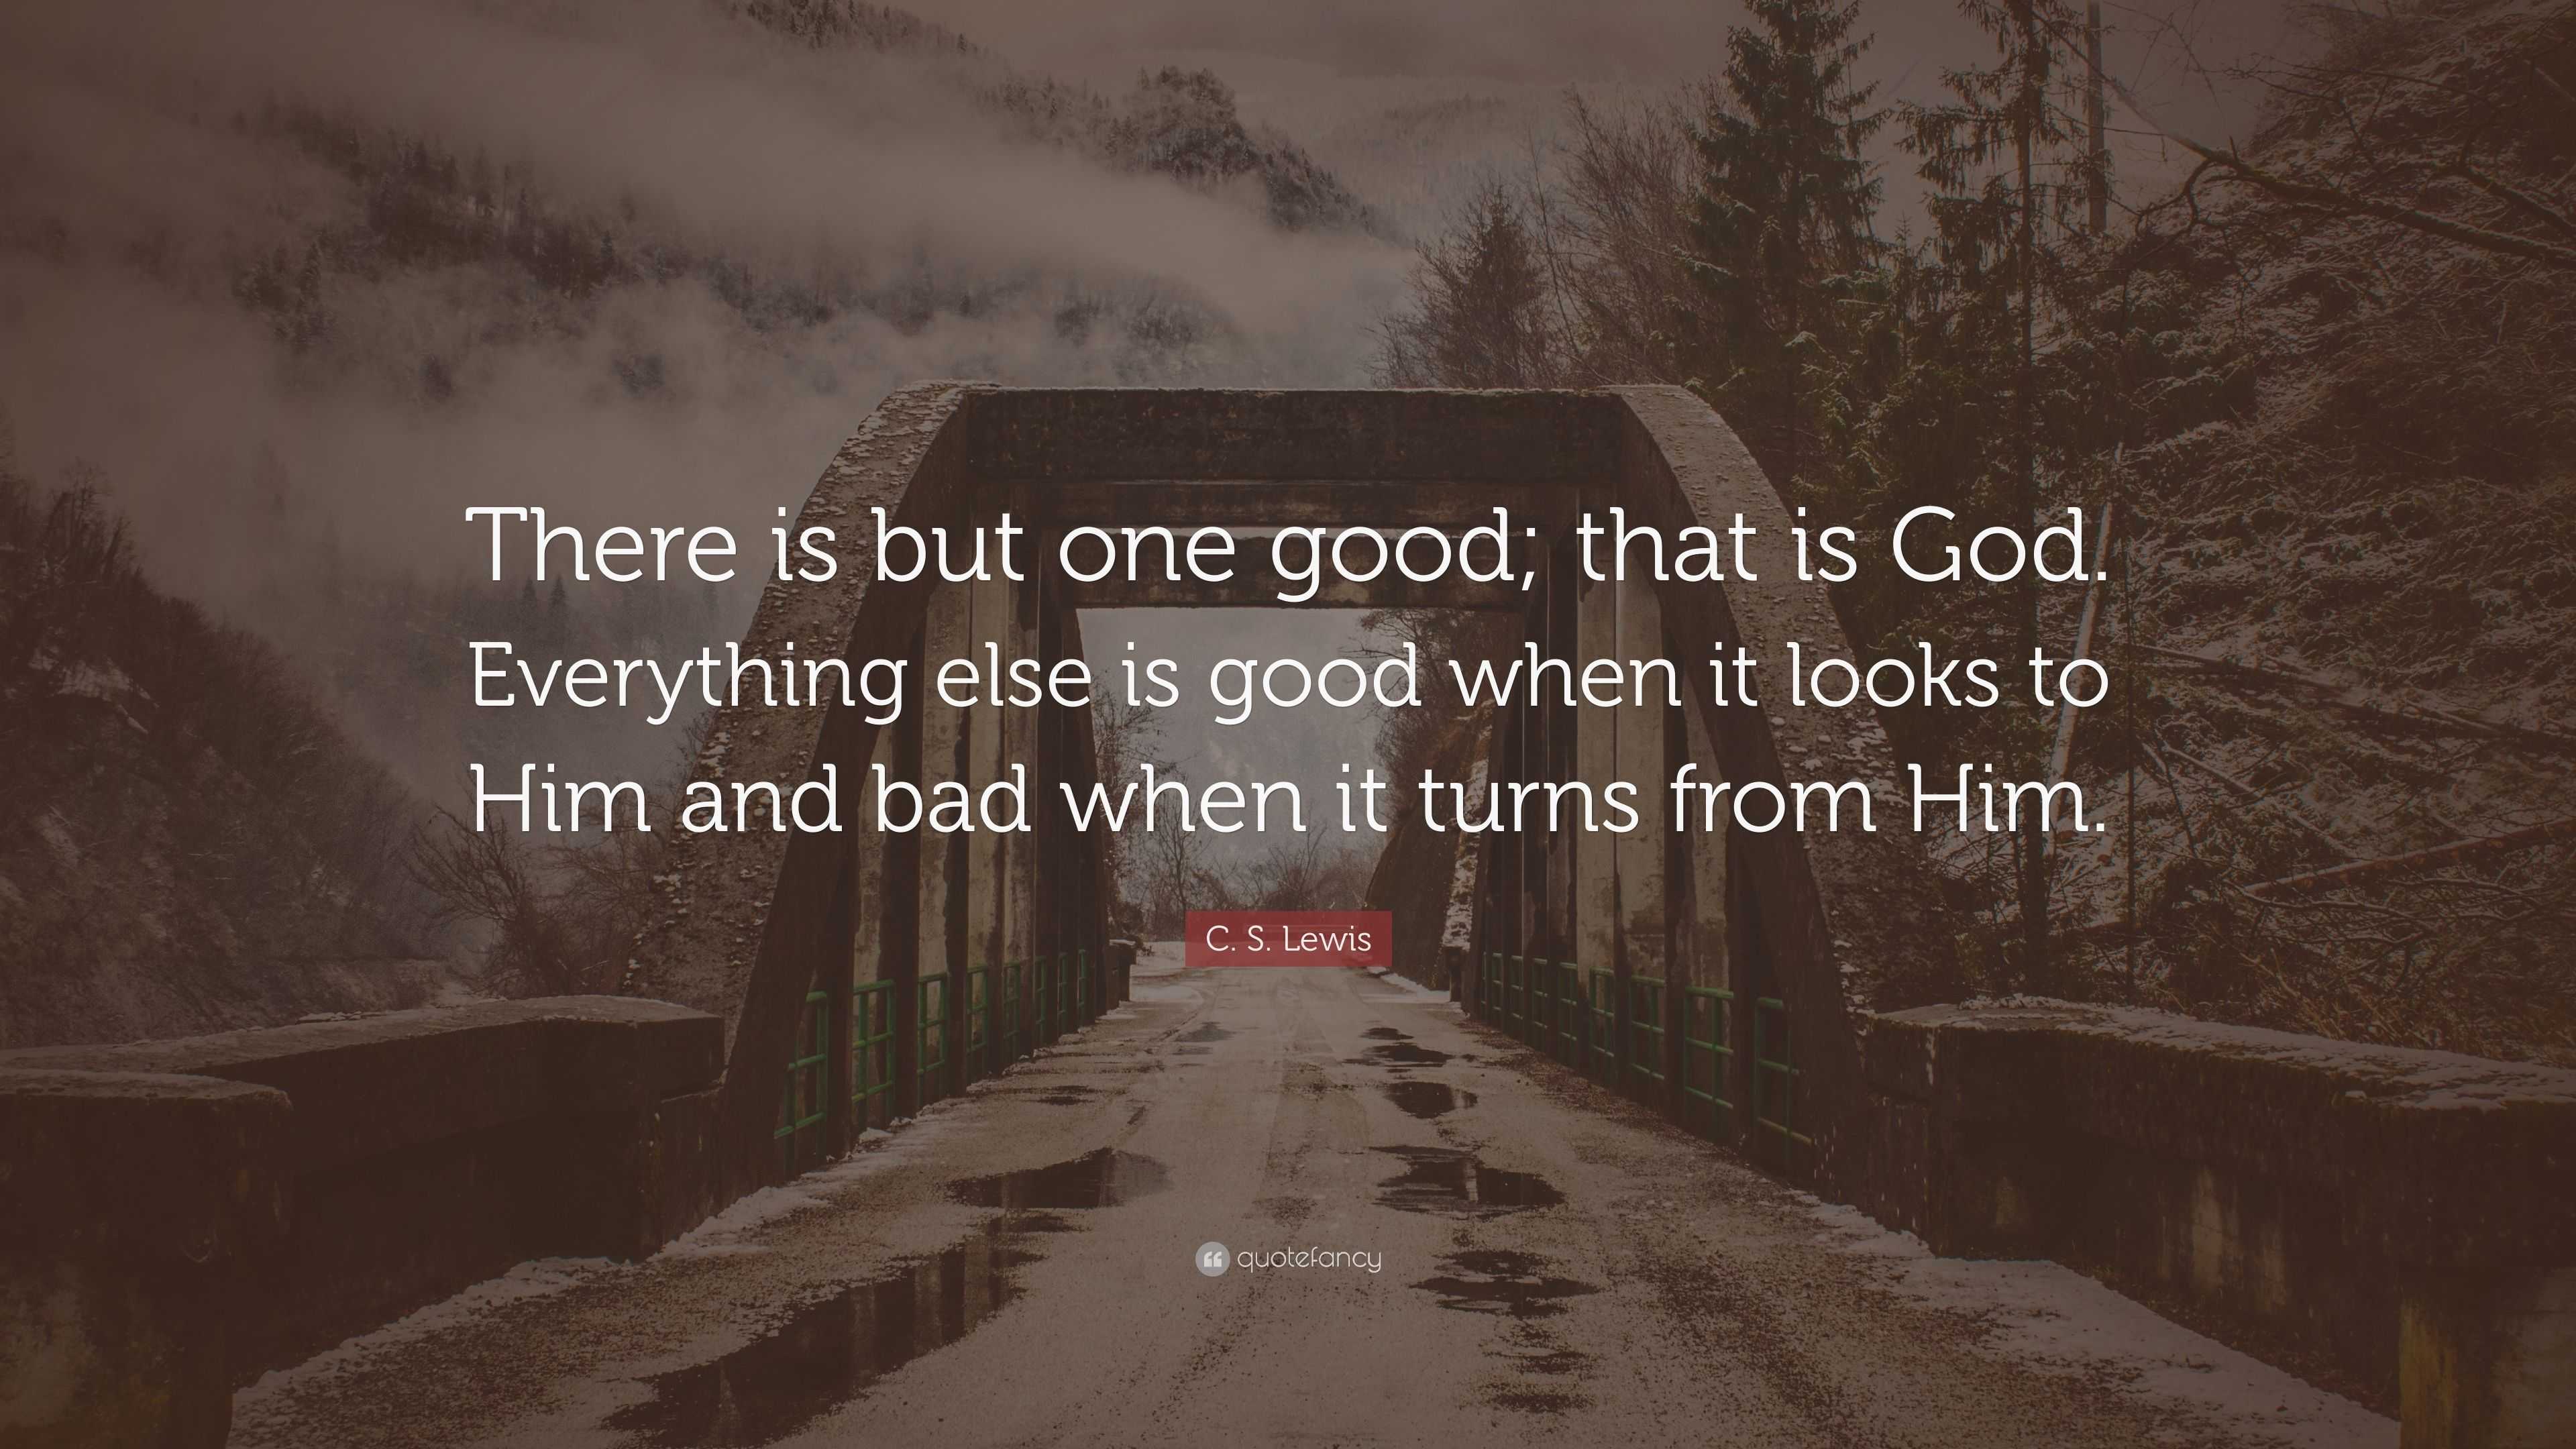 Everything else is good when it looks to Him and bad when it turns from Him...